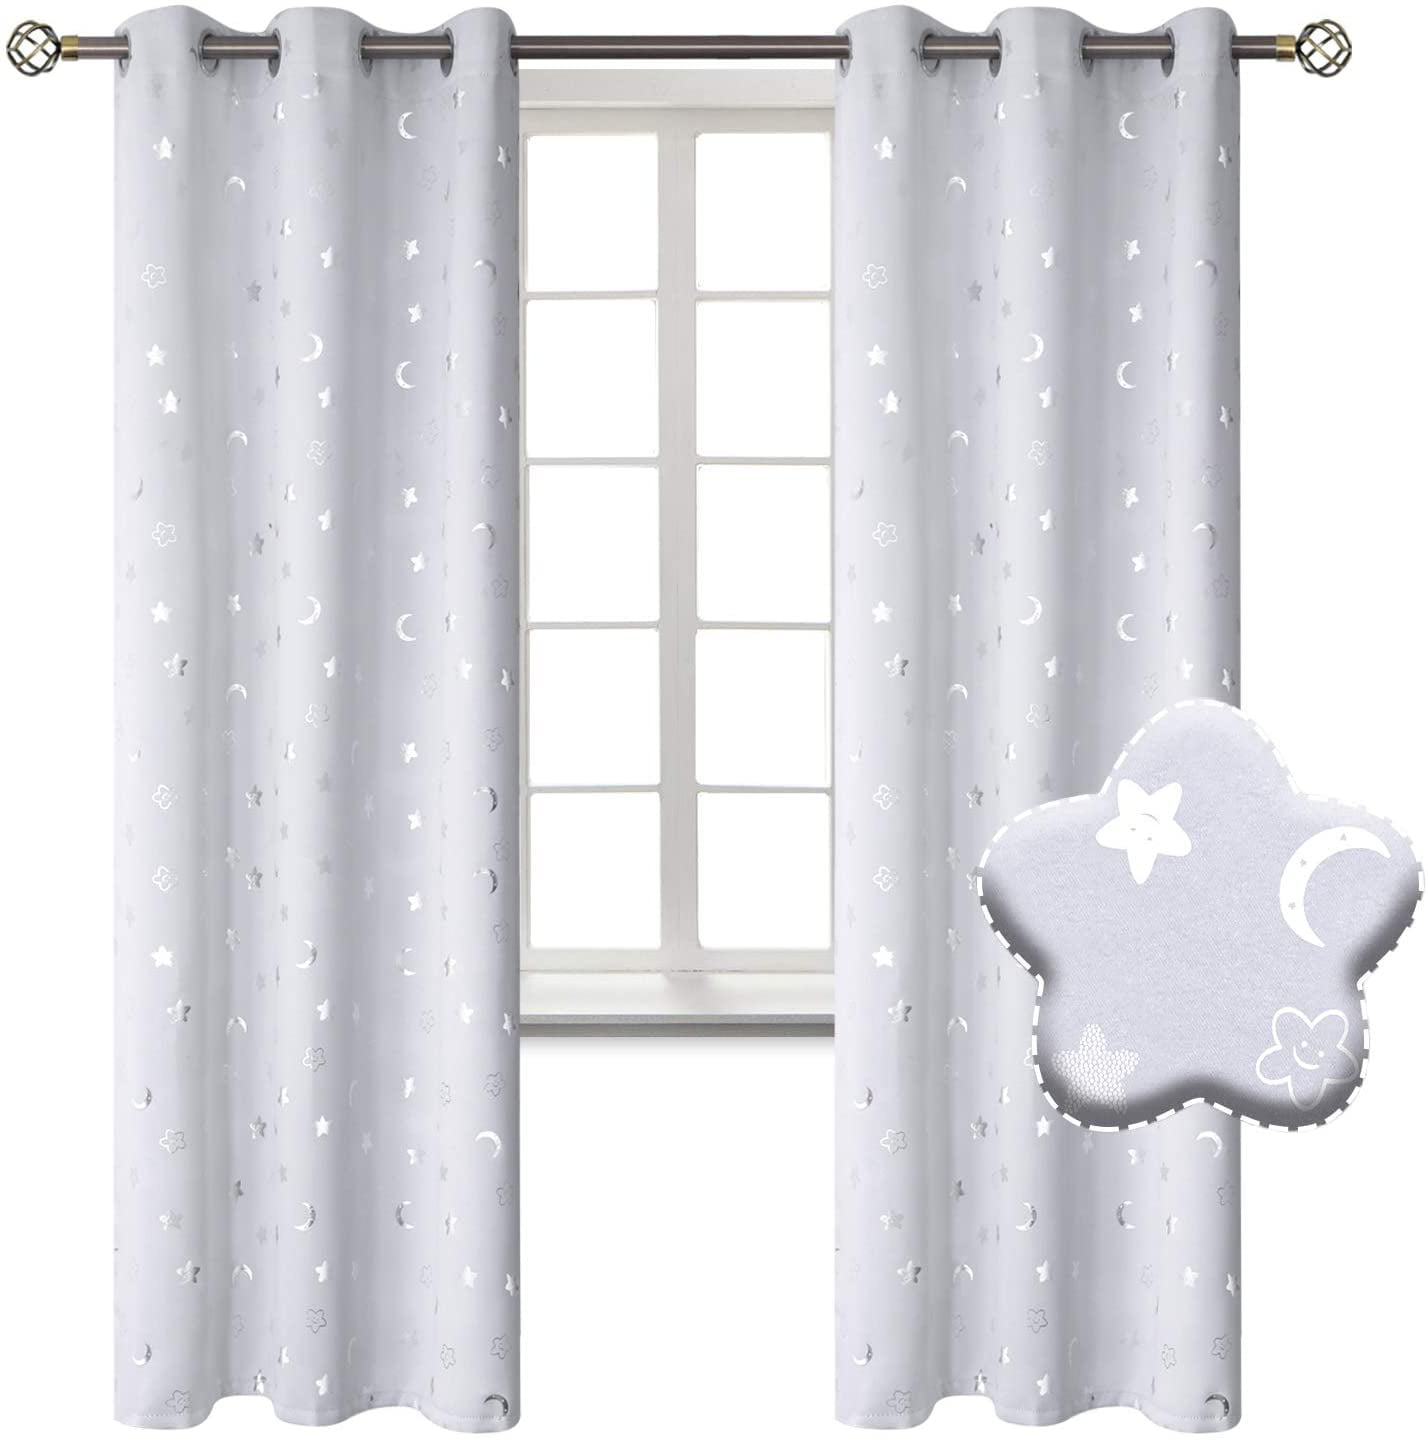 Grommet Thermal Insulated Room Darkening Printed Kids Curtains Pink 2 Panels of 42 x 54 Inch BGment Moon and Stars Blackout Curtains for Girls Bedroom 